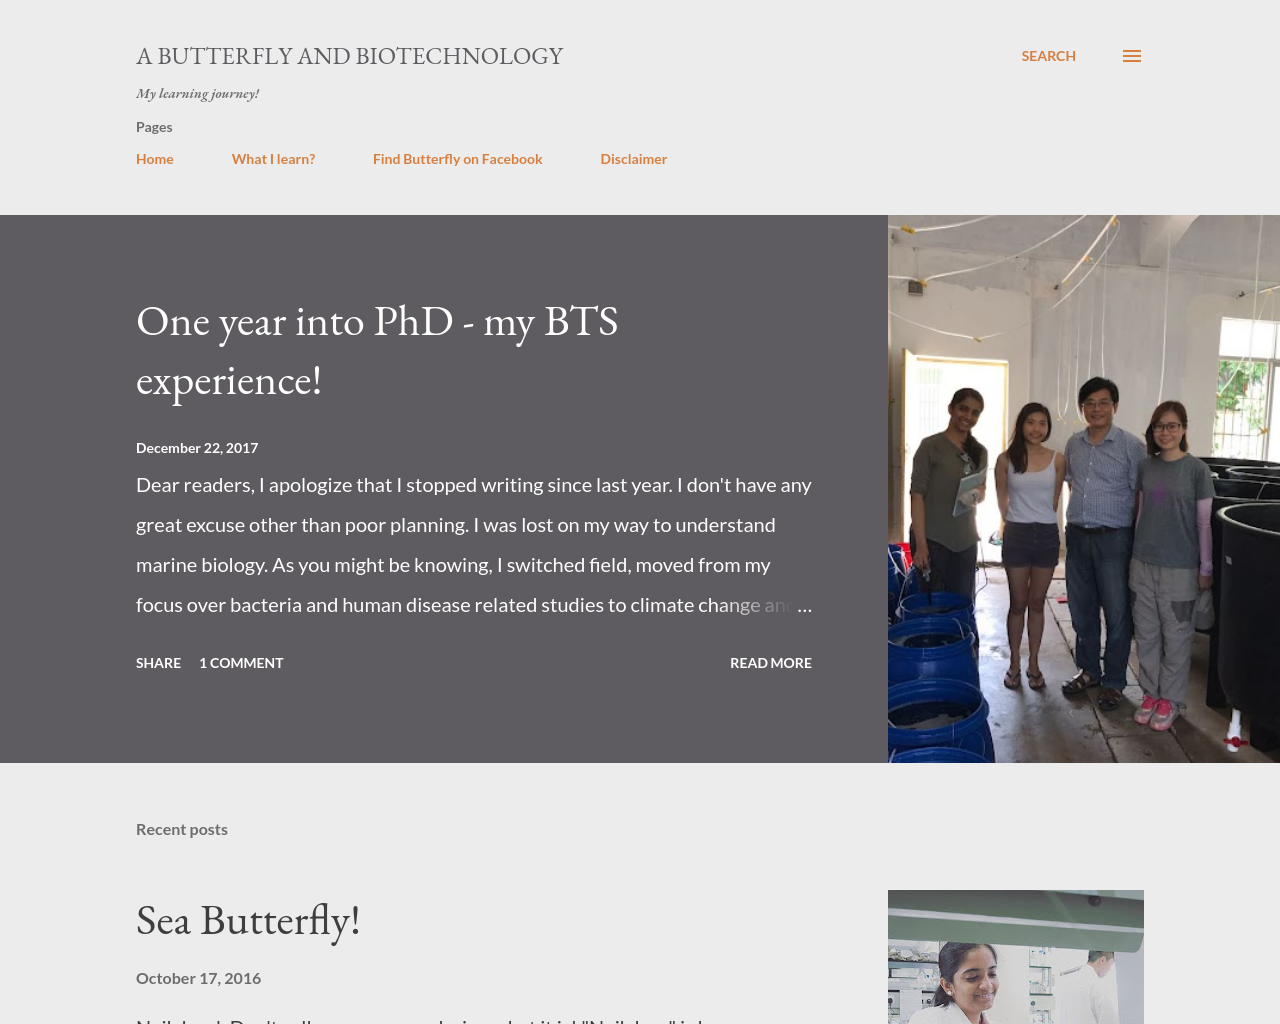 A Butterfly and Biotechnology